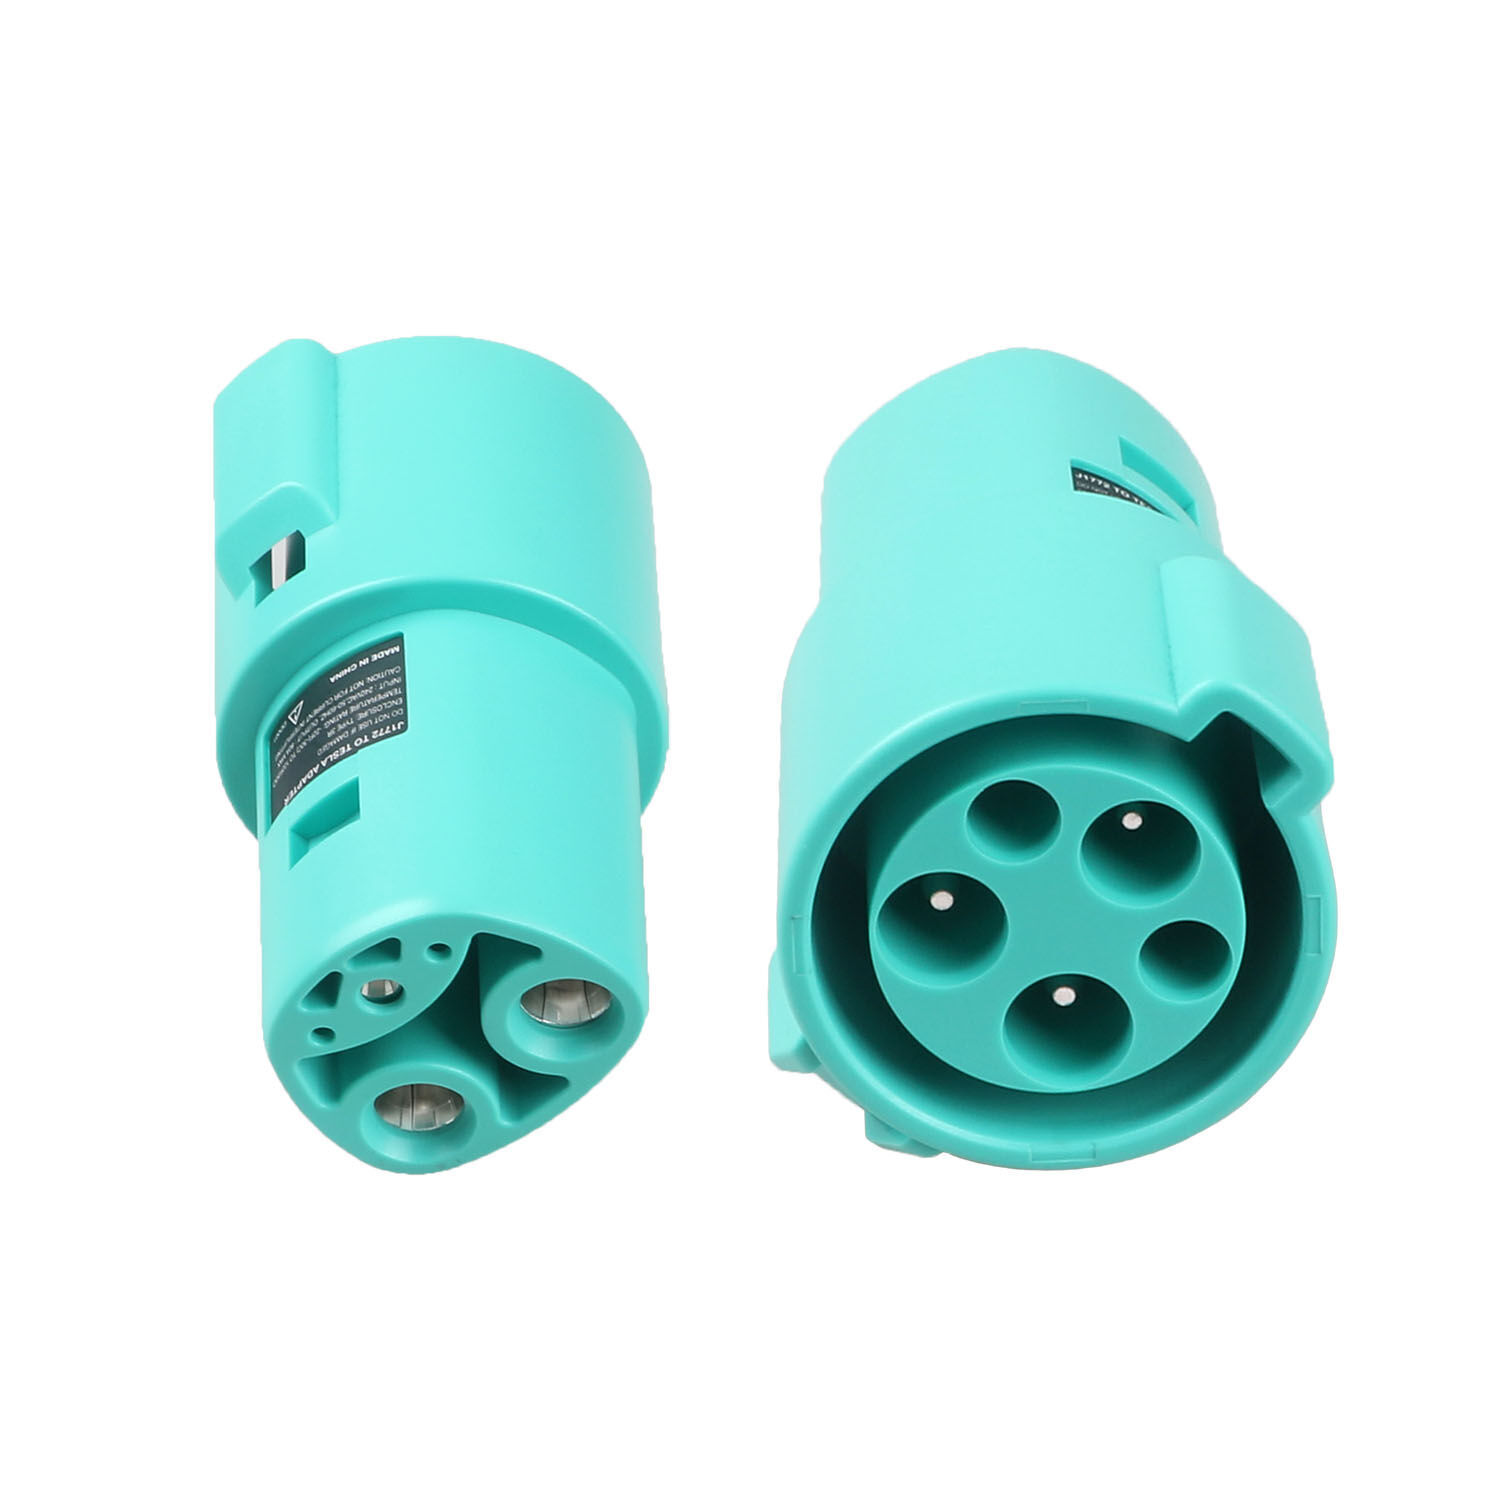 Buy Wholesale China J1772 To Tesla Charging Adapter 60amp 250vcompatible  With Sae J1772 Charger T & Type 1 To Tesla Connector Model Y Ev Charger at  USD 10.5